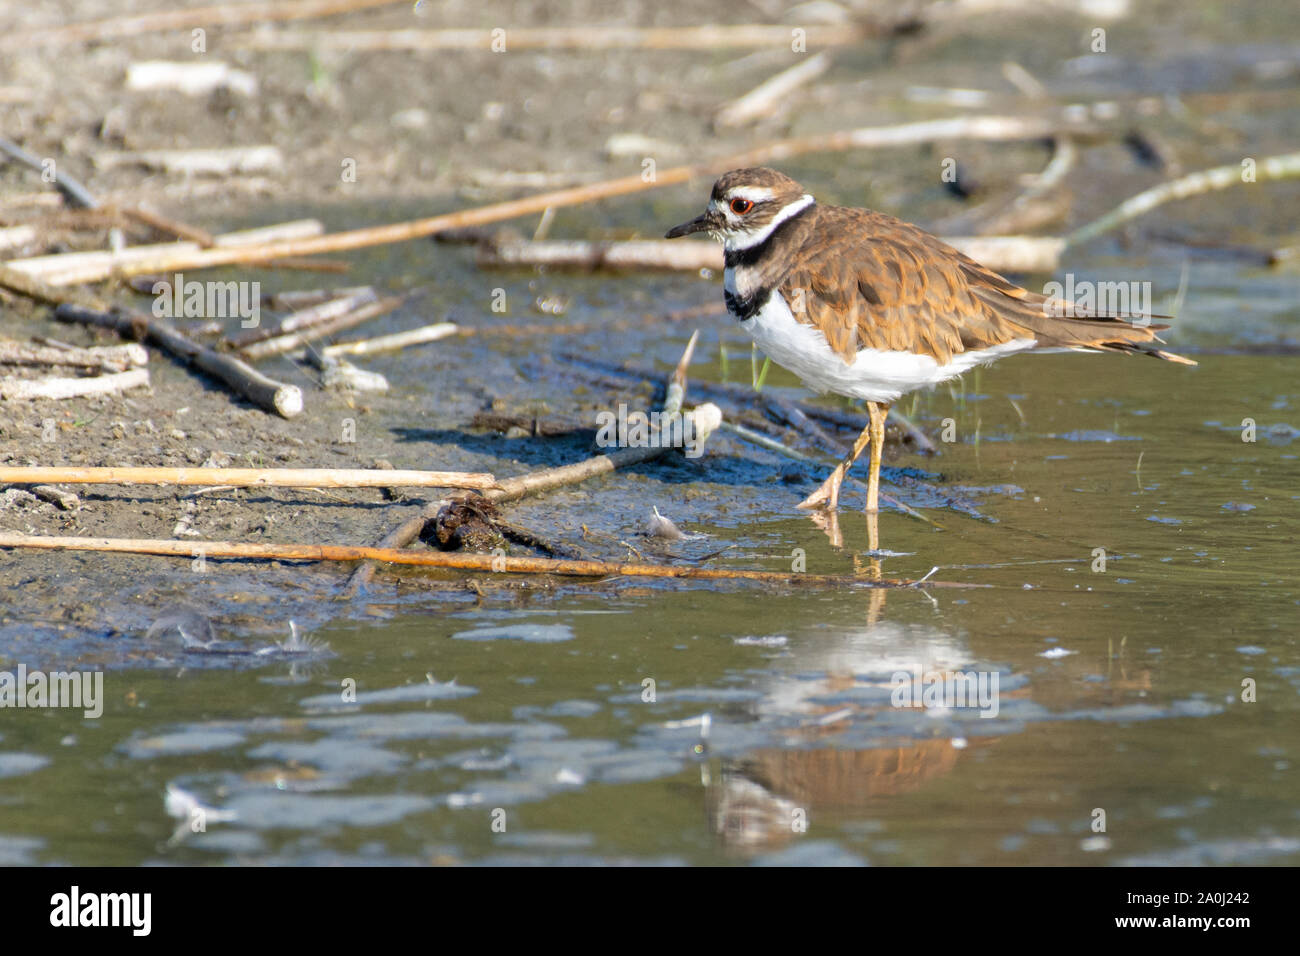 A killdeer (Charadrius vociferus) standing in the wetlands searching for food in Canada. Stock Photo